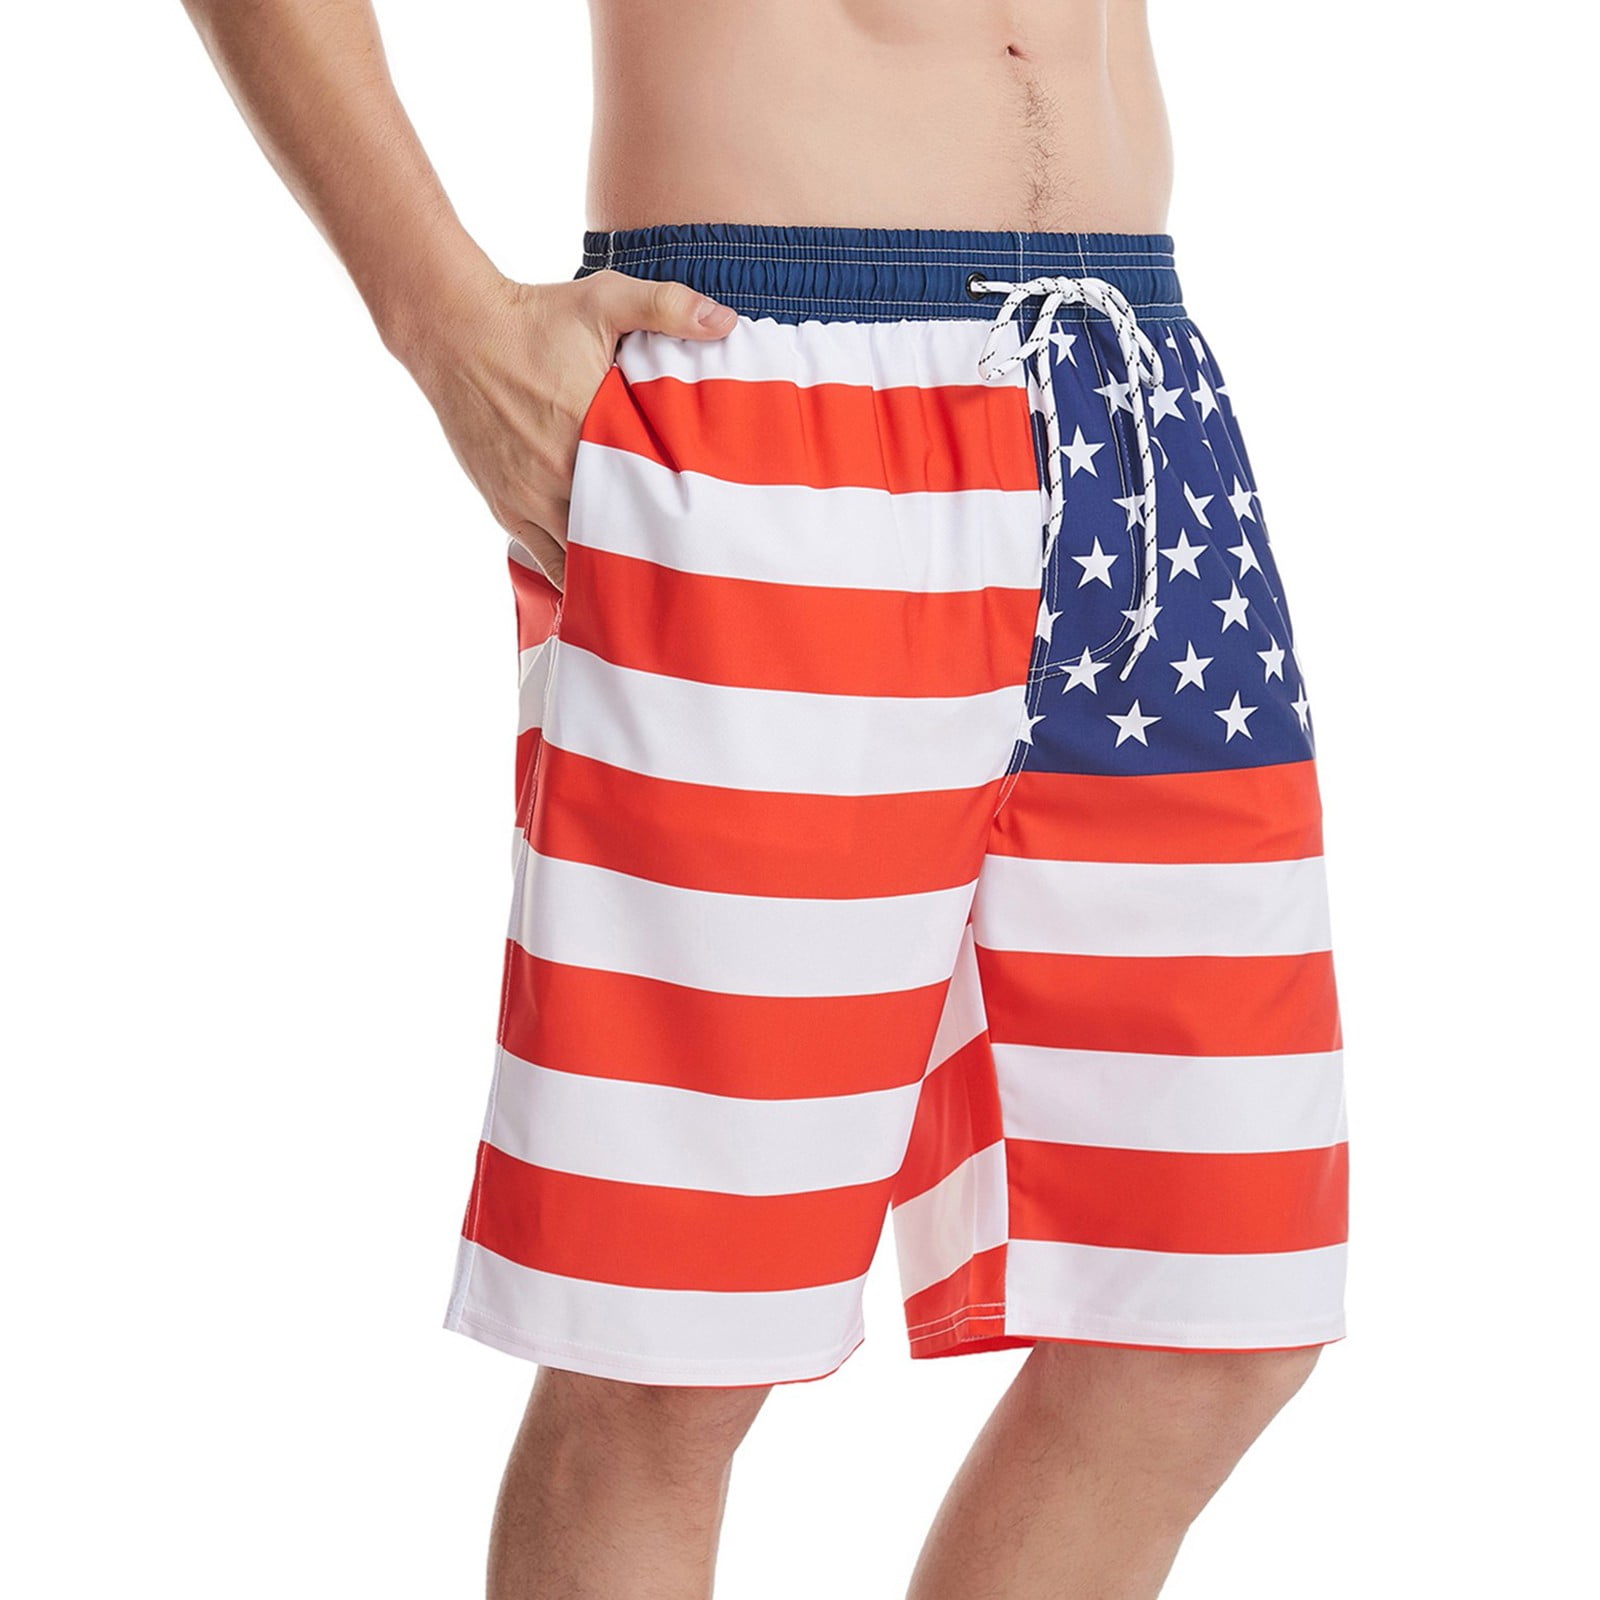 FASUWAVE Mens Swim Trunks Spain Flag with America Flag Quick Dry Beach Board Shorts with Mesh Lining